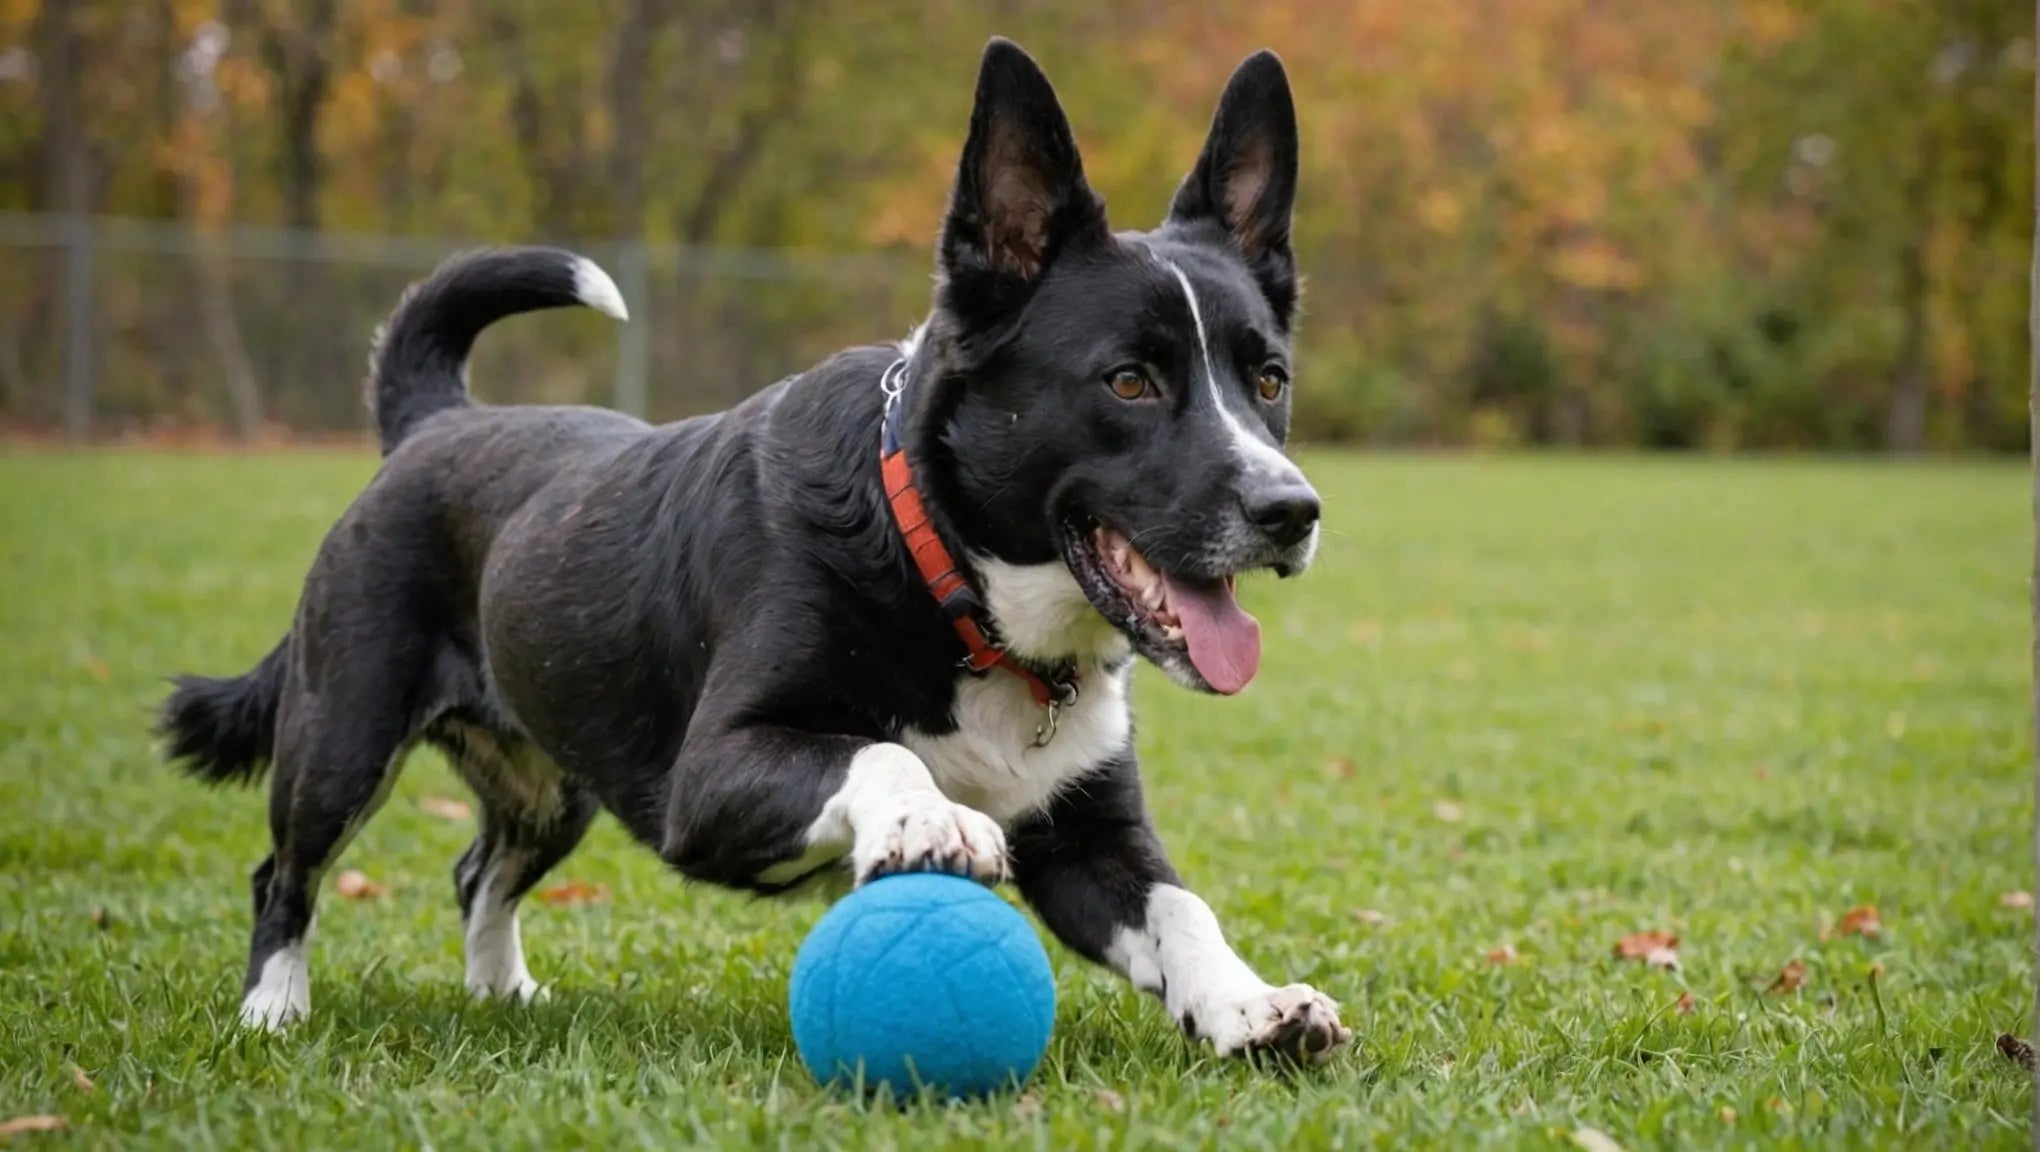 Keep Your Dog Entertained with Safe and Durable Dog Toys